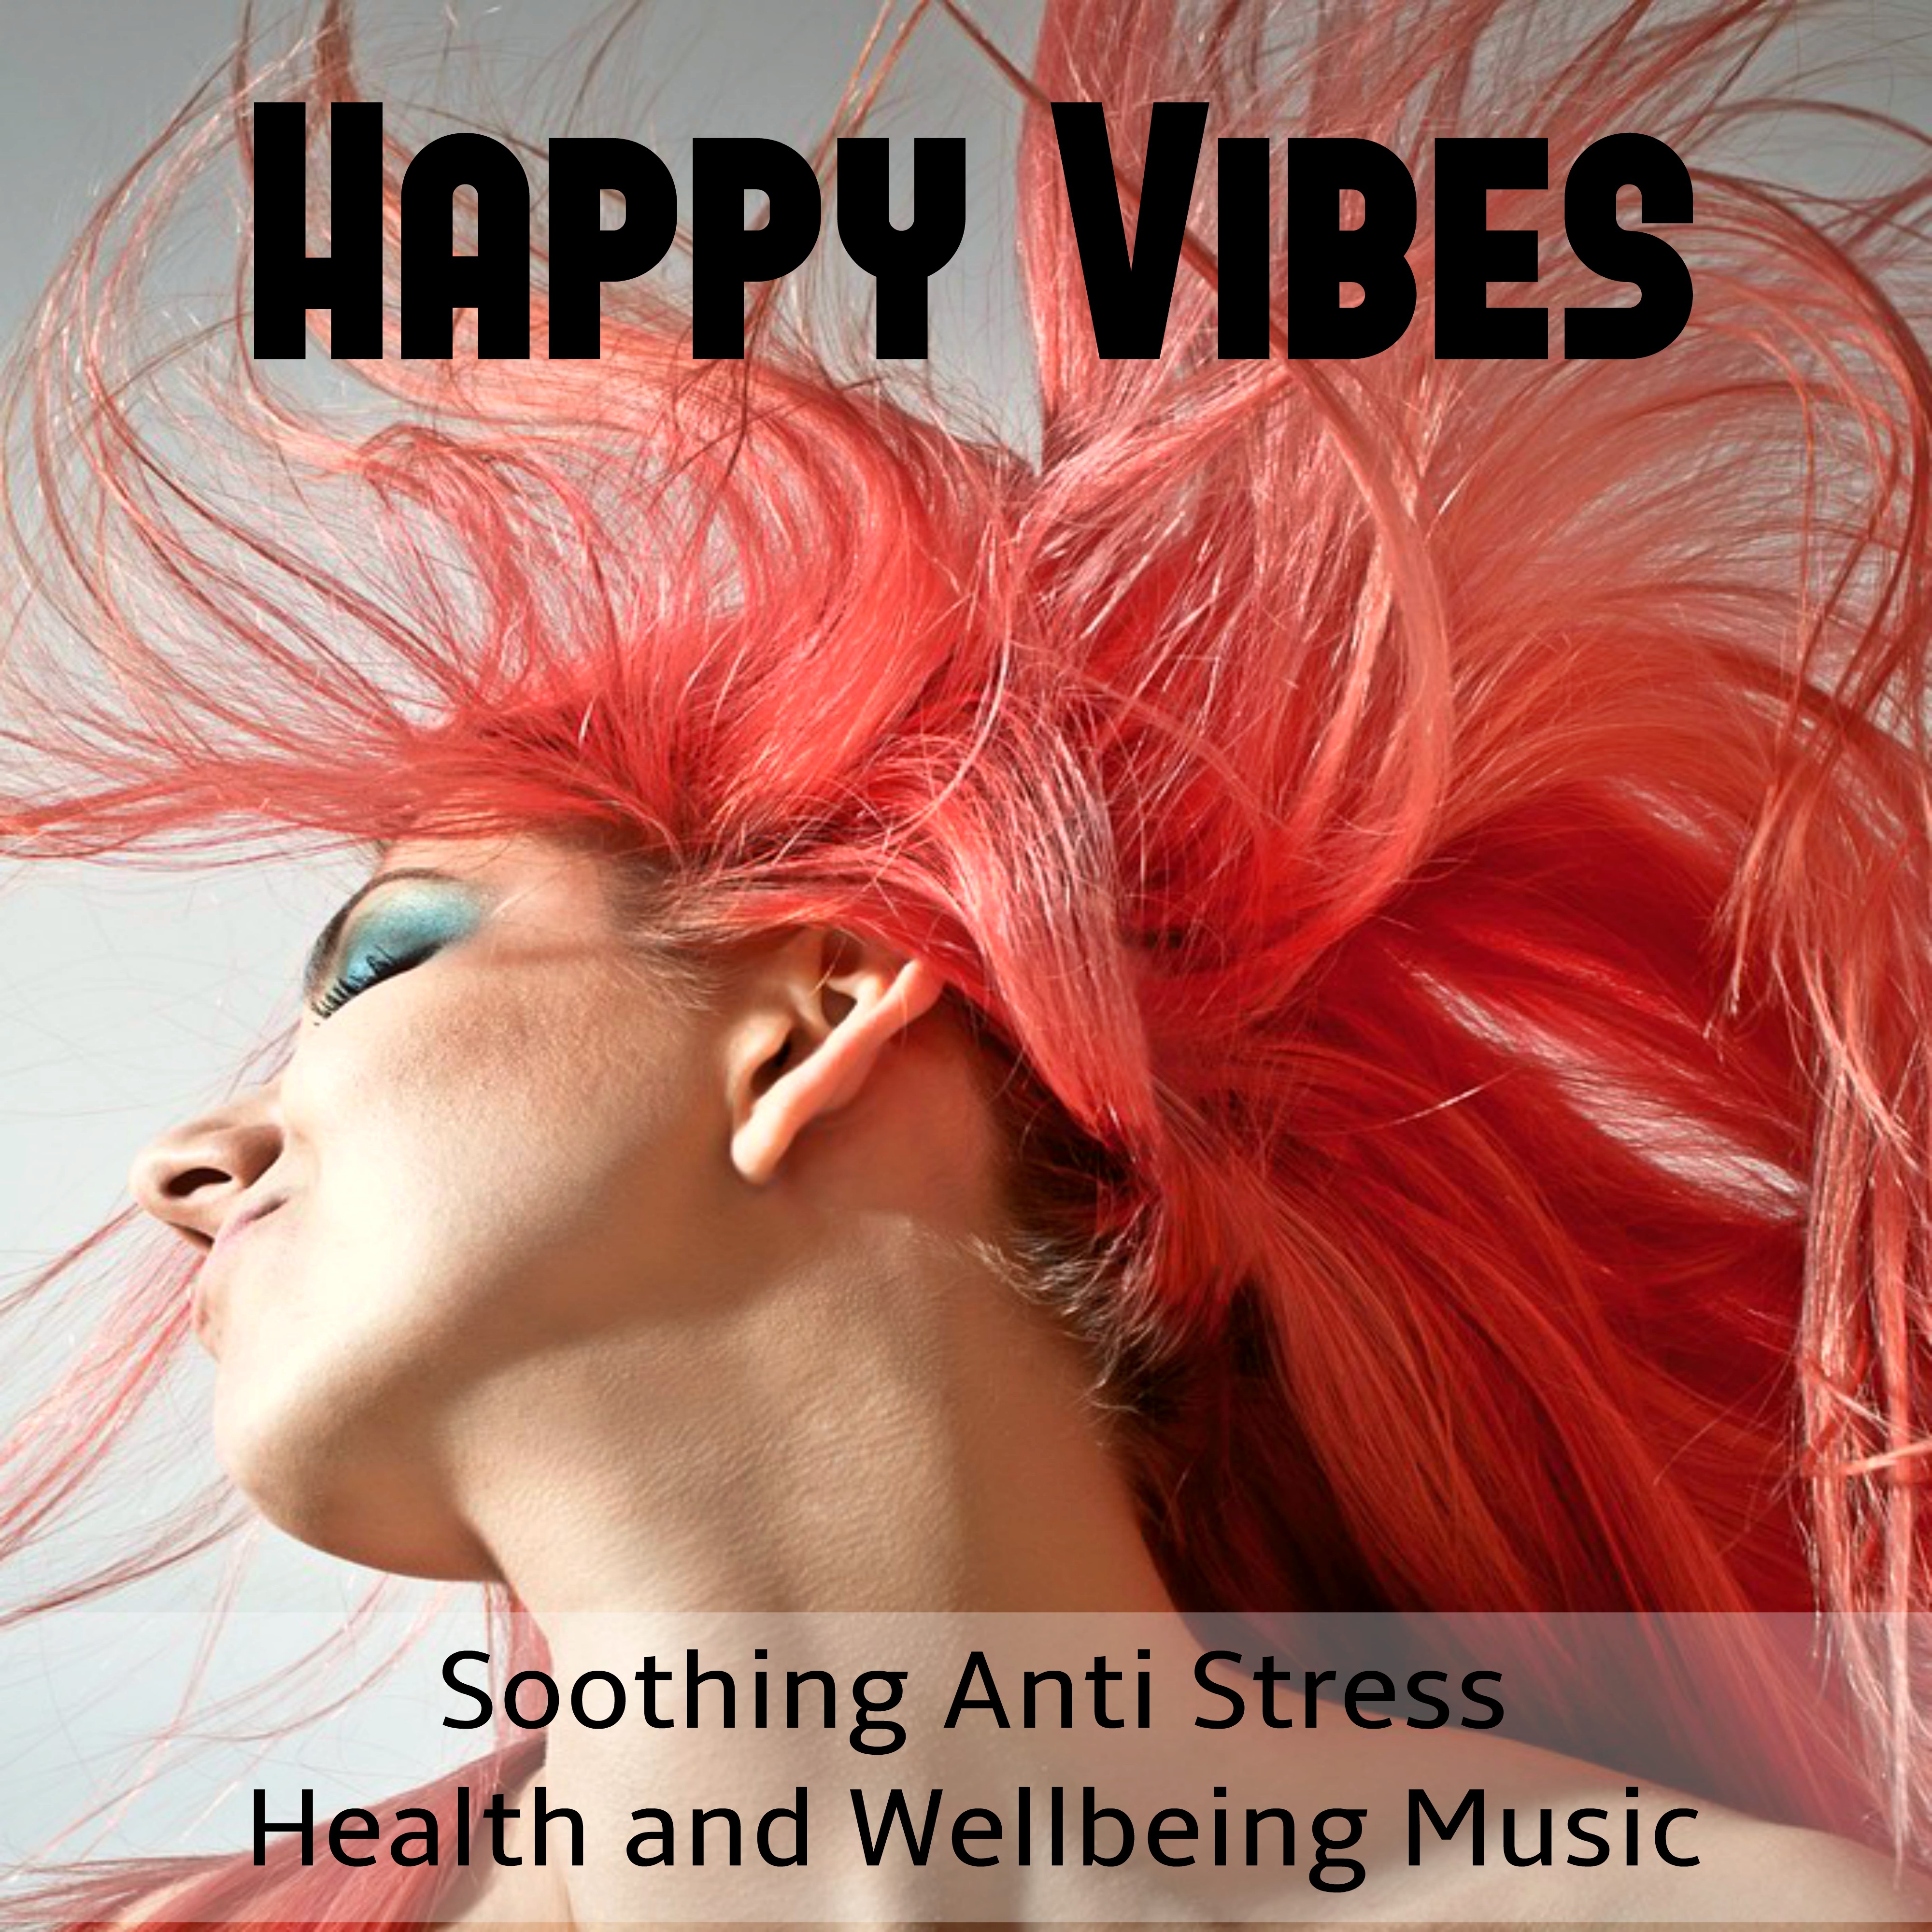 Happy Vibes - Soothing Anti Stress Health and Wellbeing Music with Nature New Age Instrumental Sounds